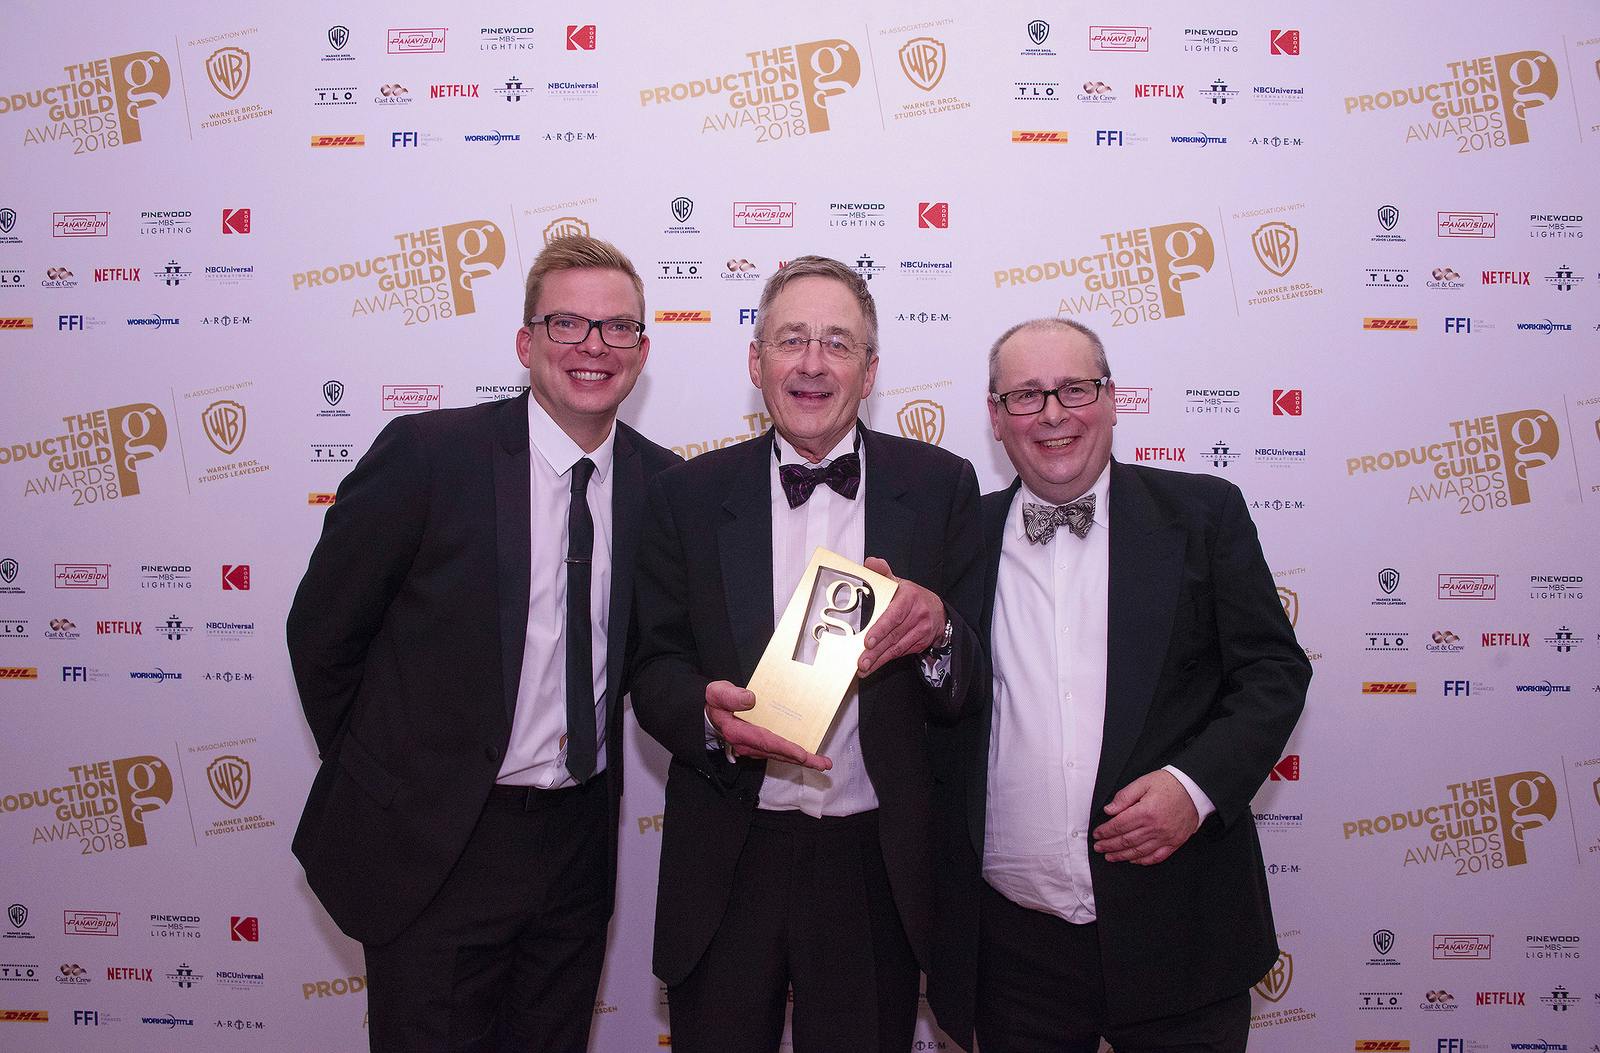 Gareth Tandy standing in a suit with two other men, holding his award